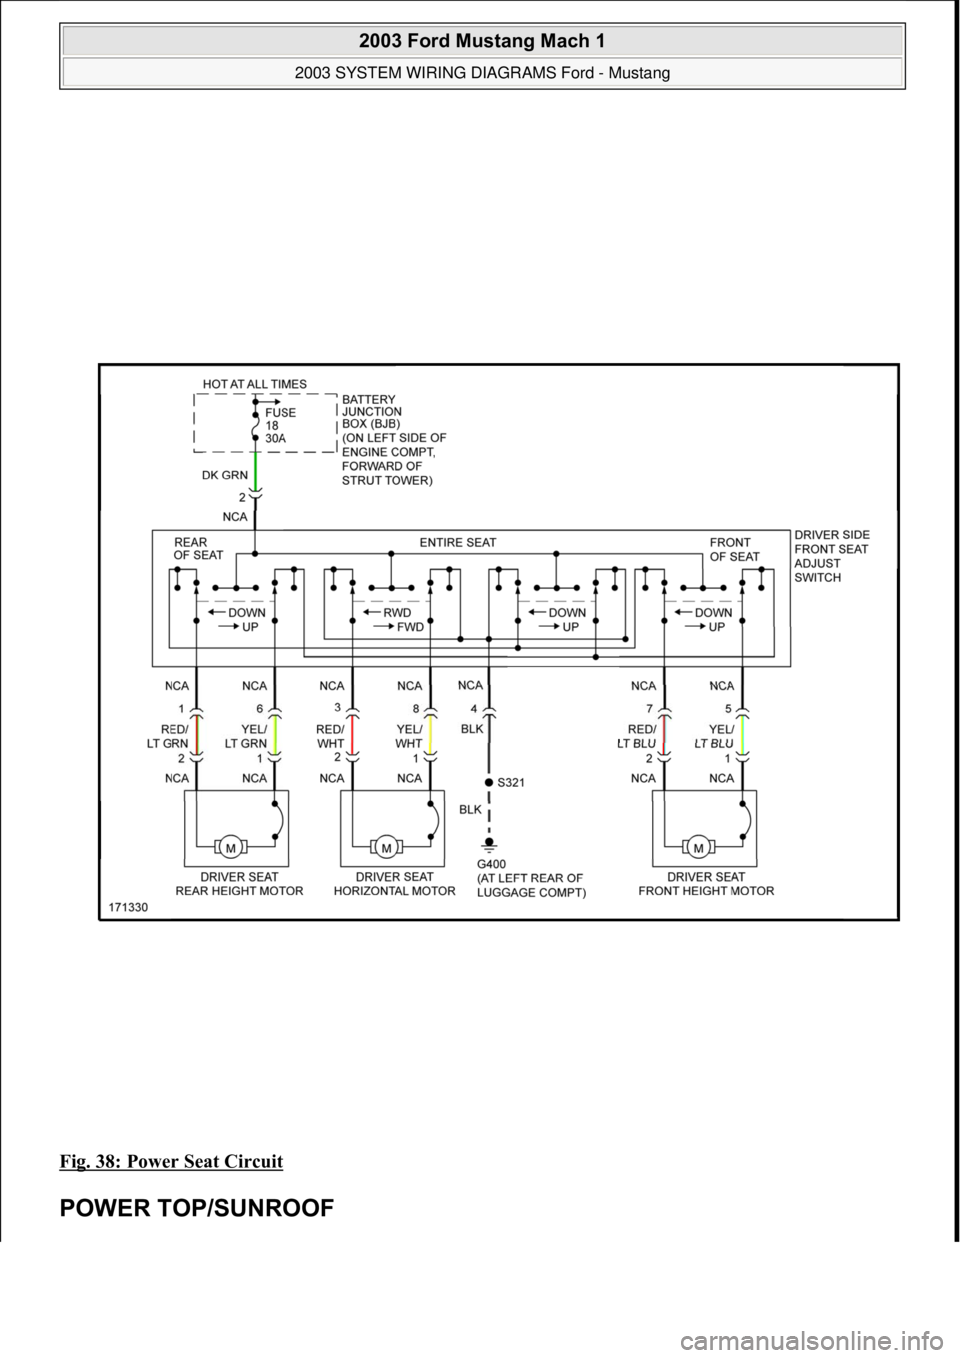 FORD MUSTANG 2003  Workshop Manual Fig. 38: Power Seat Circuit 
POWER TOP/SUNROOF 
 
2003 Ford Mustang Mach 1 
2003 SYSTEM WIRING DIAGRAMS Ford - Mustang  
111  
18 ноября  2011 г. 12:54:33Page 39 © 2006 Mitchell Repair Informa